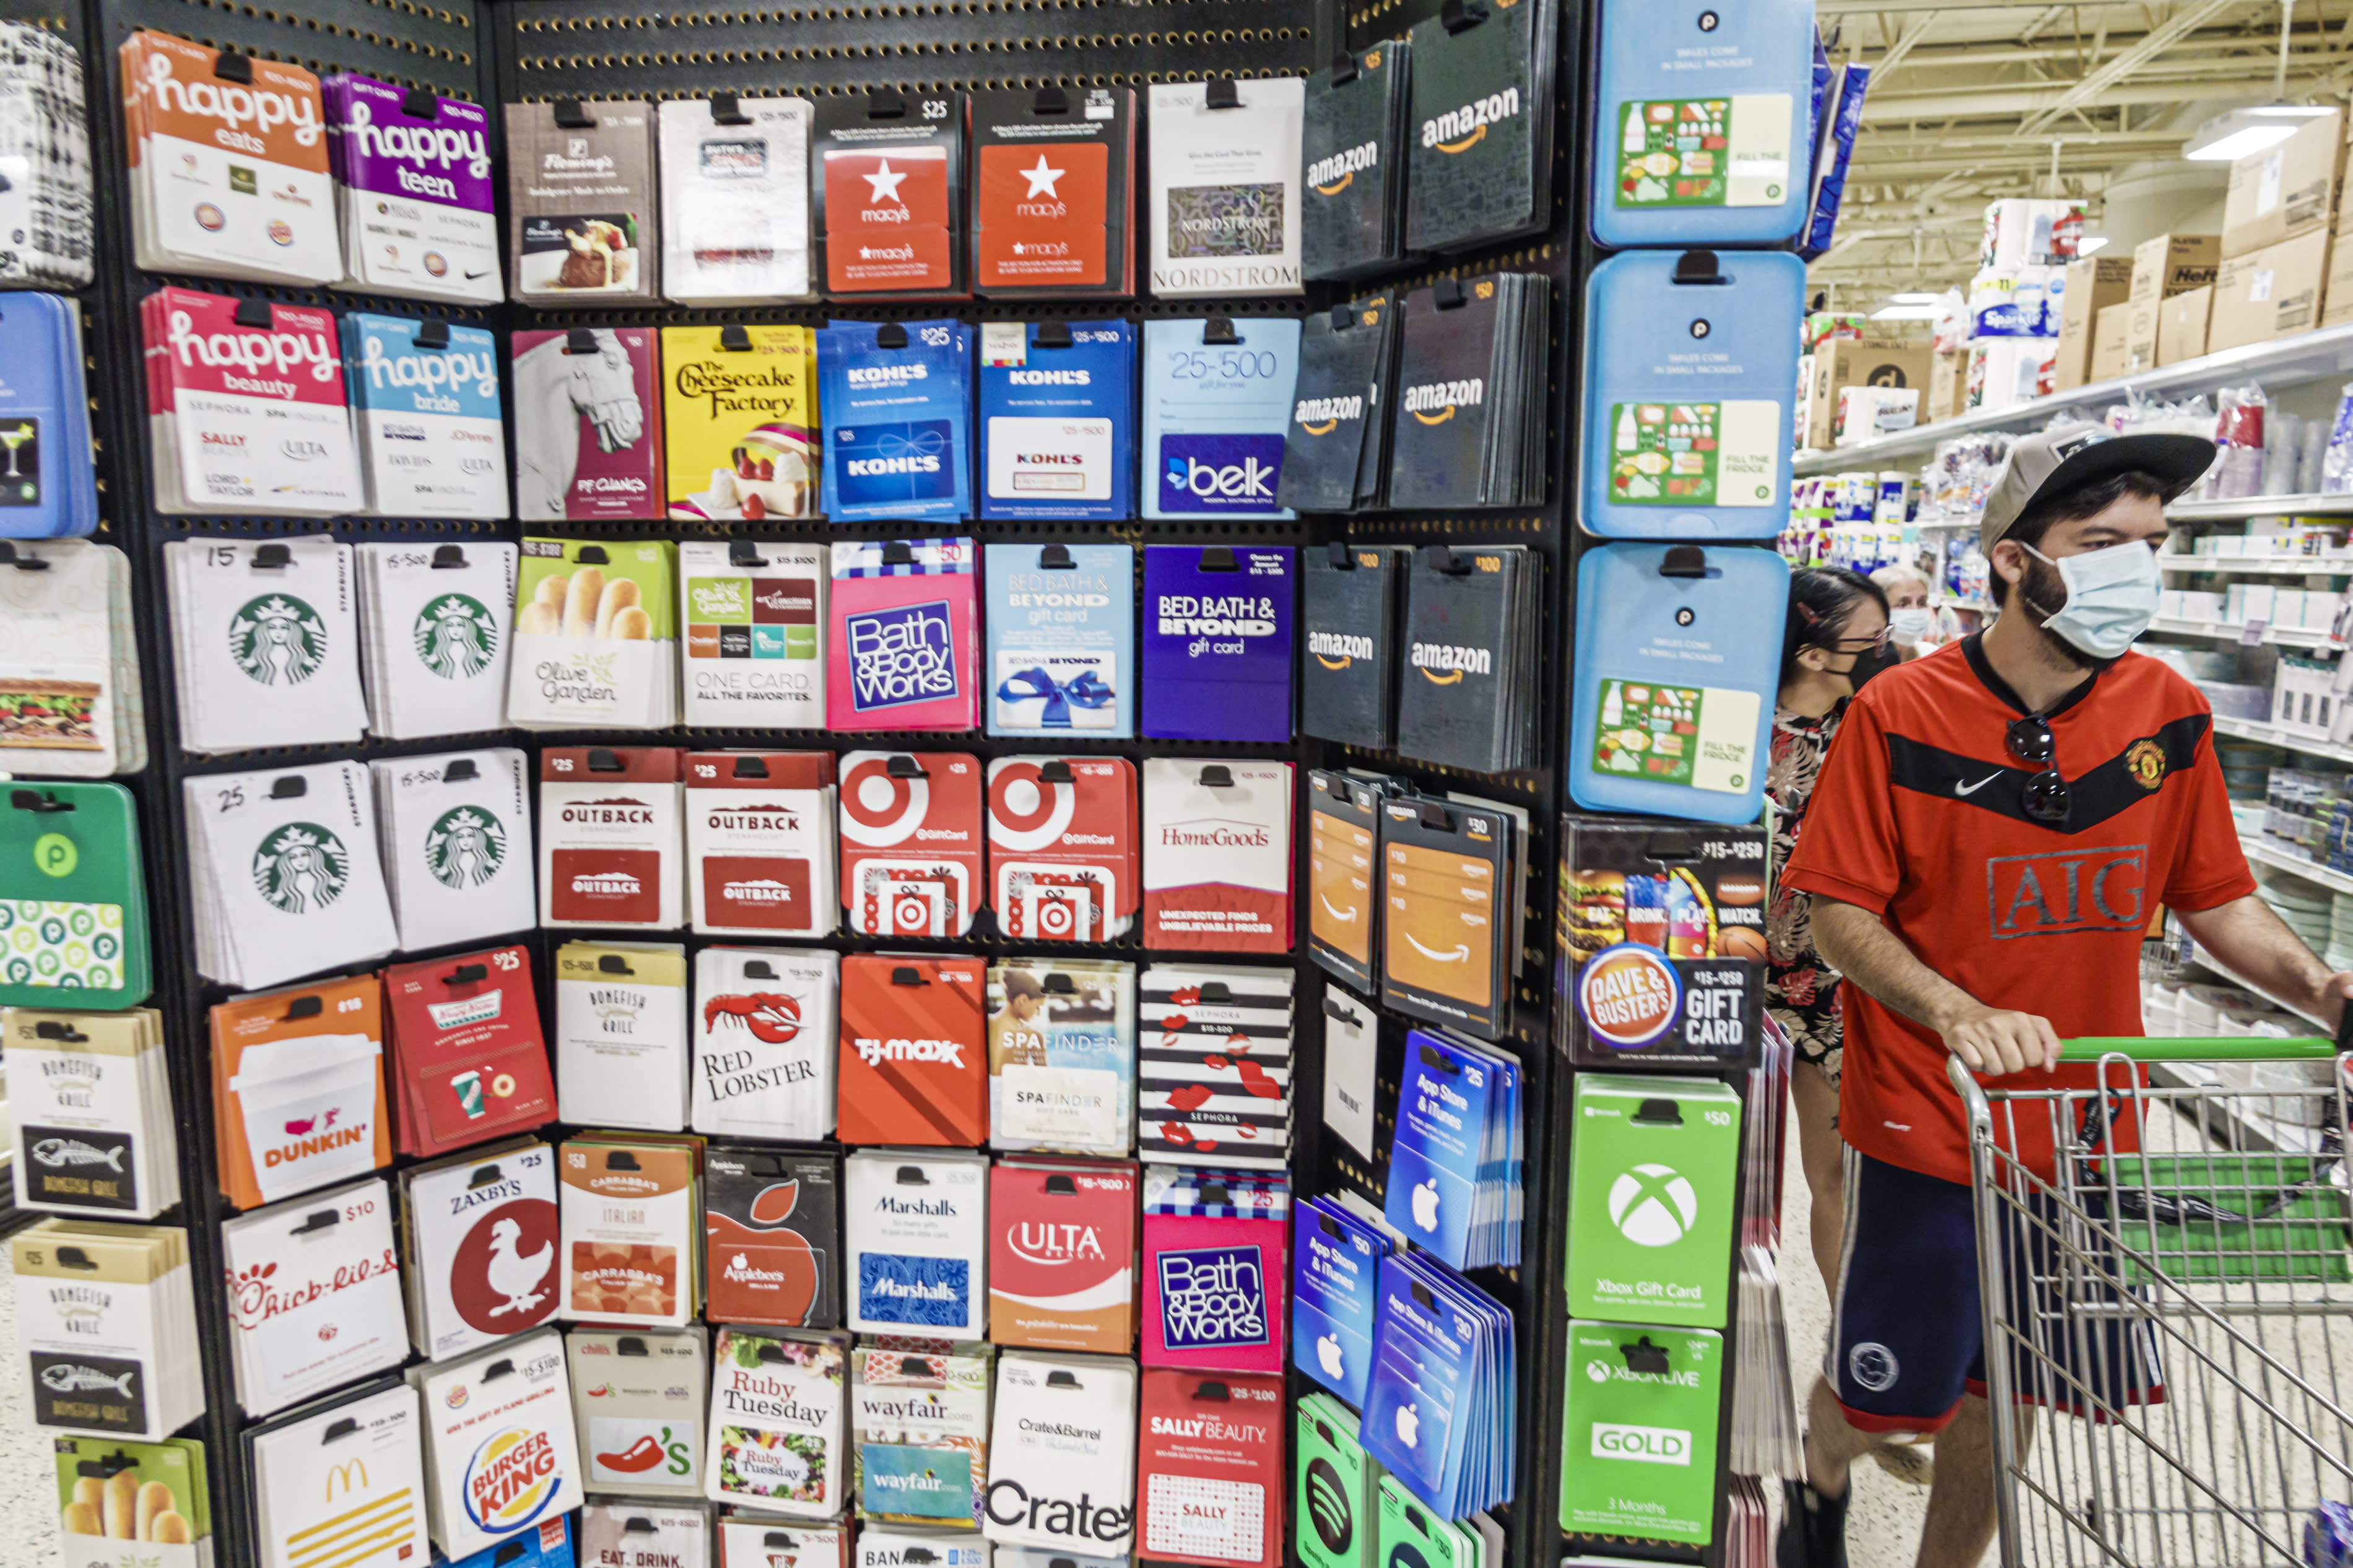 Purchasing Christmas gift cards can help boost retail sales in 2021: Bill Simon